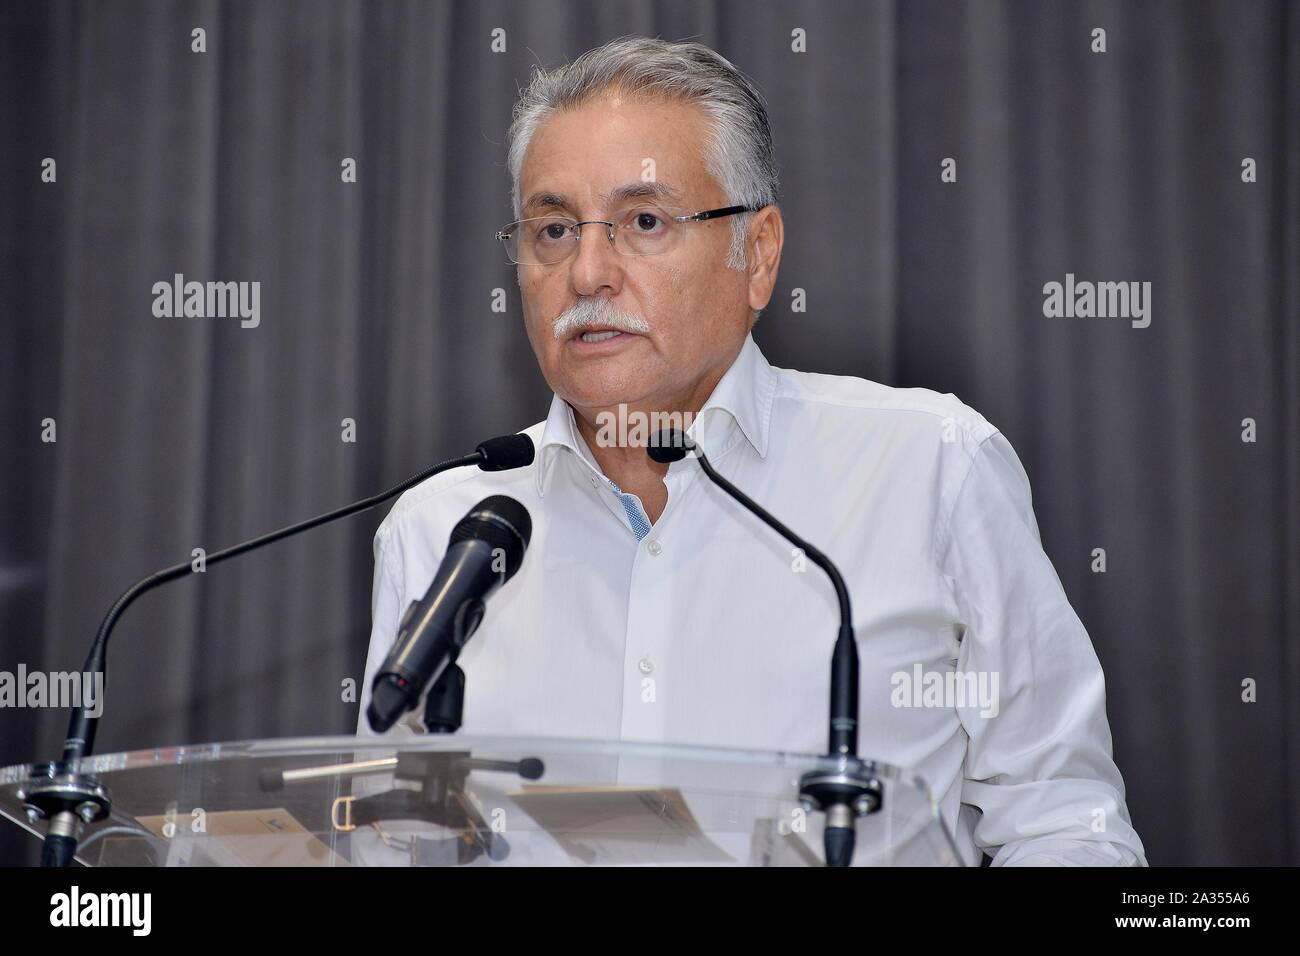 Rabat, Morocco.  4th Oct, 2019. Mohamed Nabil Benabdallah, general secretary of the Party of Progress and Socialism (PPS), speaks during a meeting of the party's central committee in Rabat, Morocco, on Oct. 4, 2019. Mohamed Nabil Benabdallah confirmed that PPS, a small Moroccan left-wing political party, will withdraw from the government. Credit: Chadi/Xinhua/Alamy Live News Stock Photo